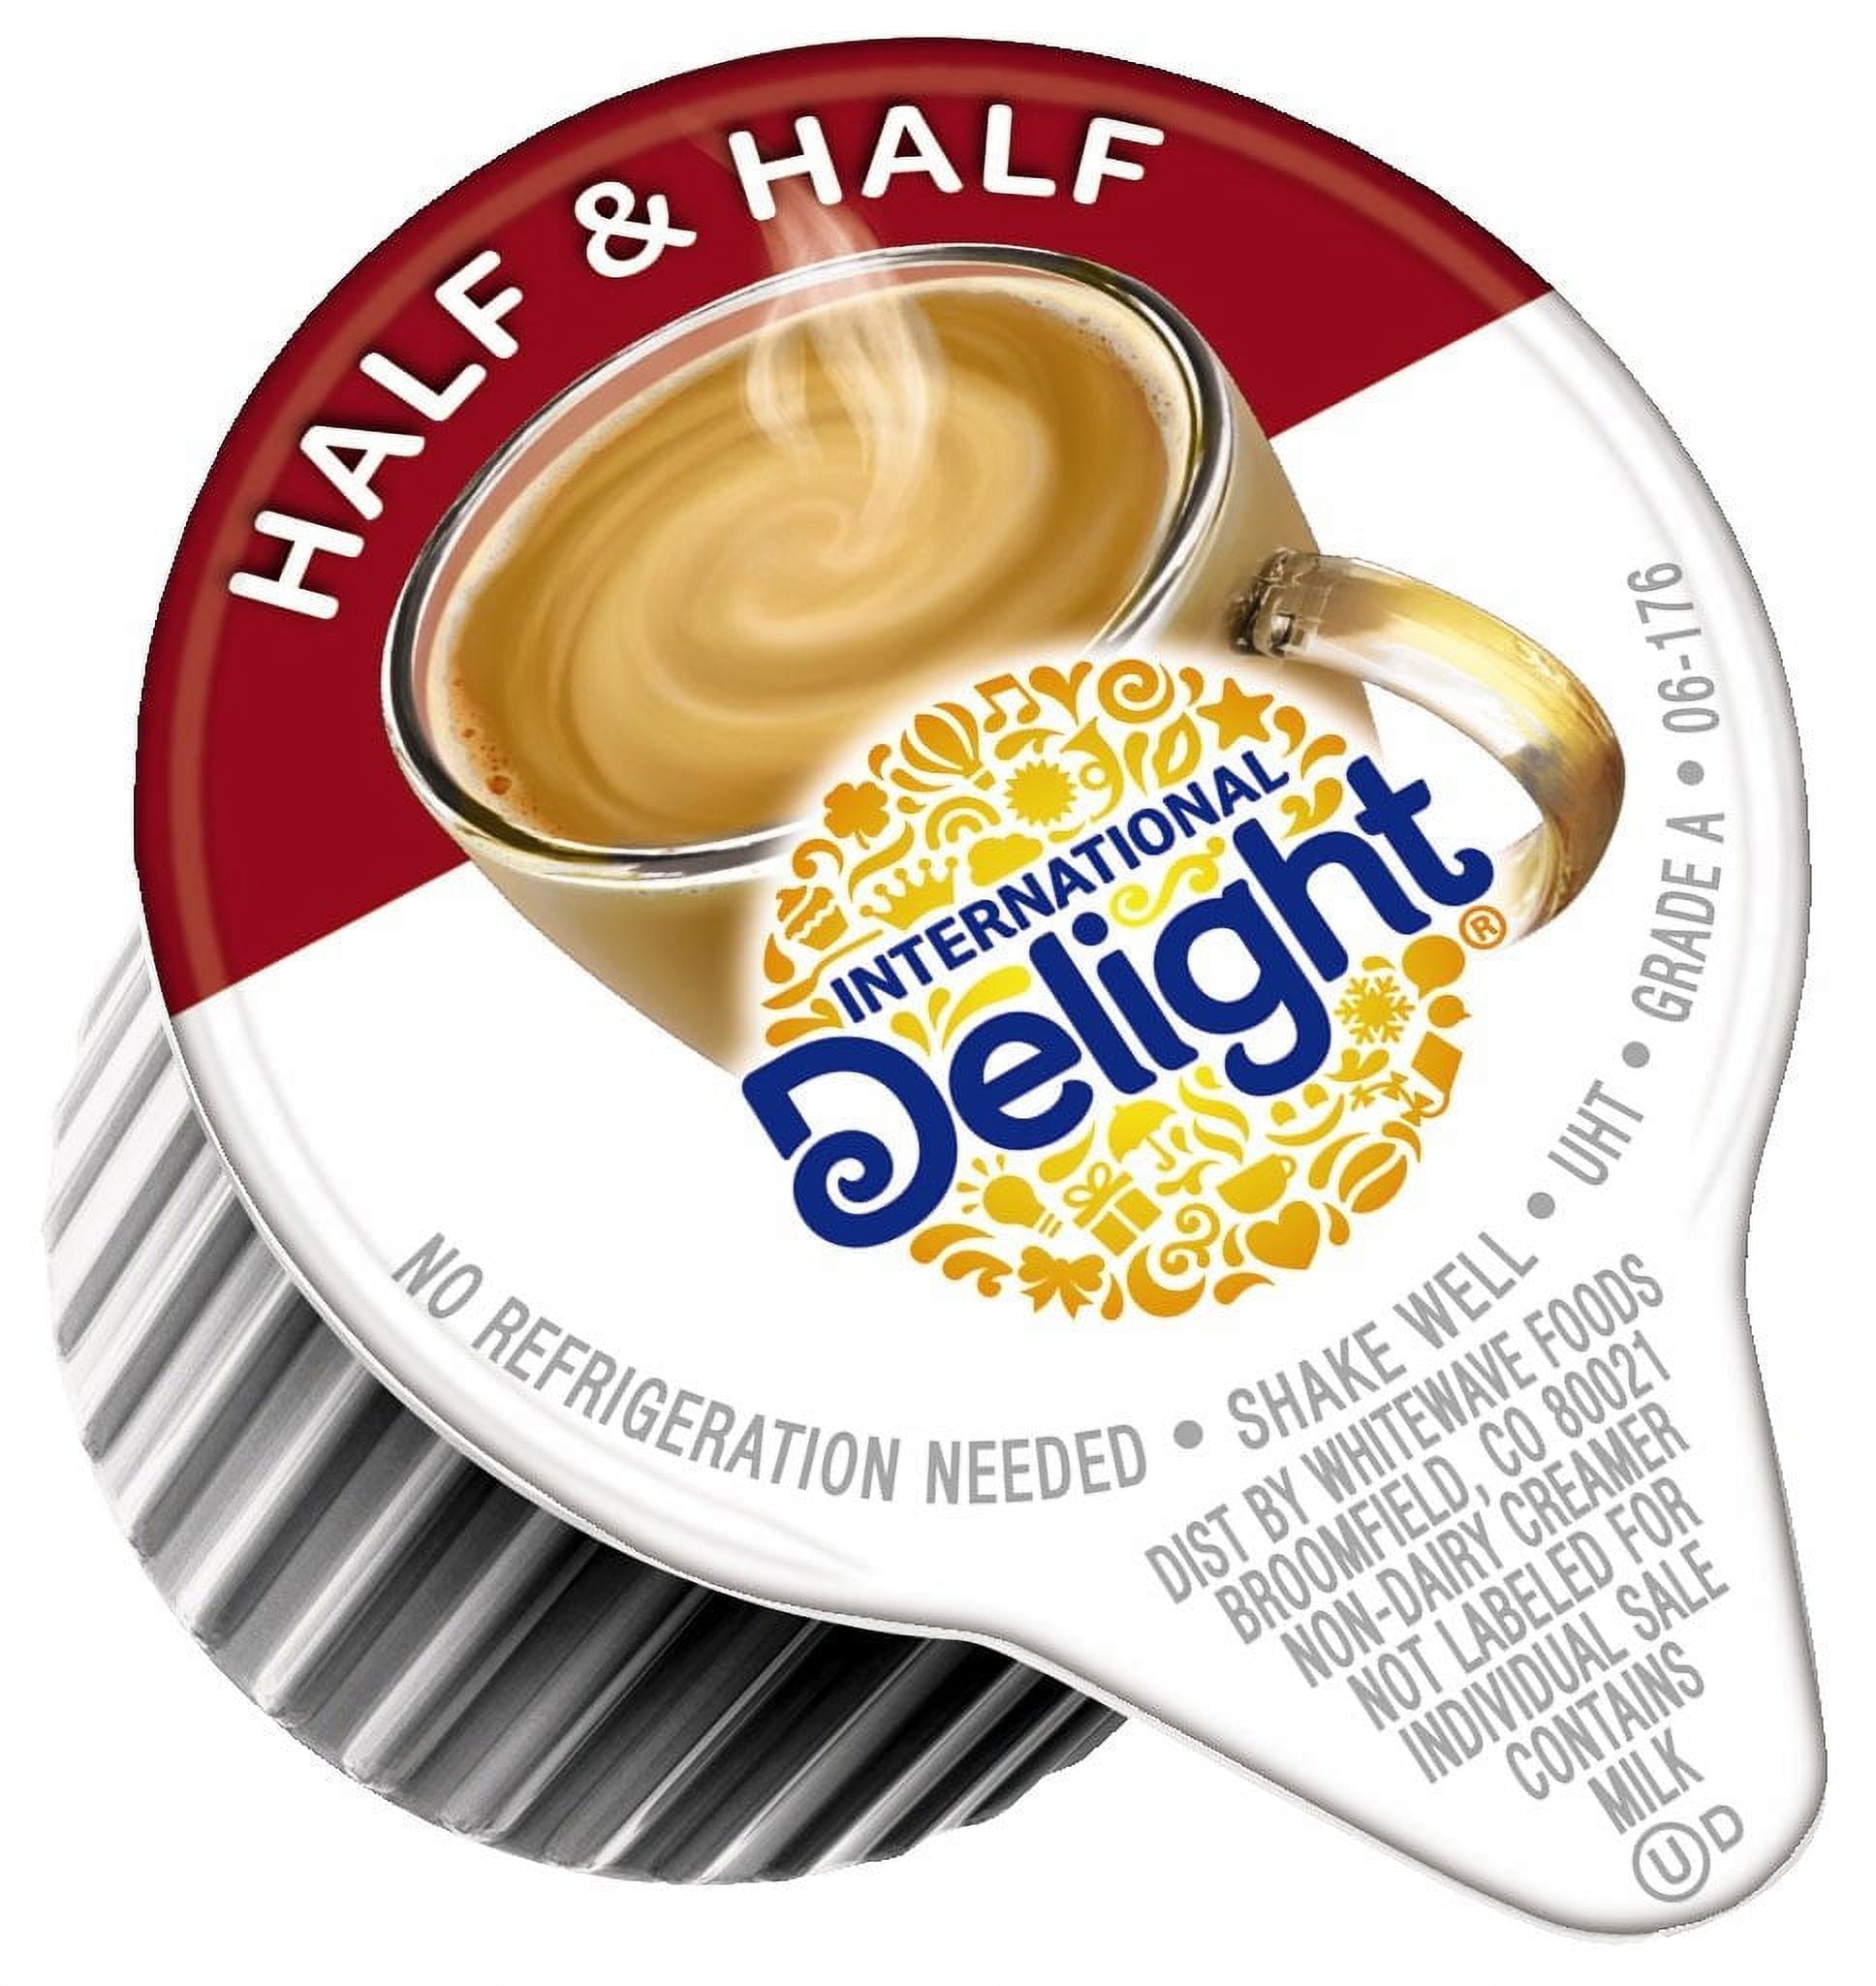 International Delights Creamer Half and Half Shelf Stable Aseptic Coffee House Inspiration 0.375 Fl Oz Cup